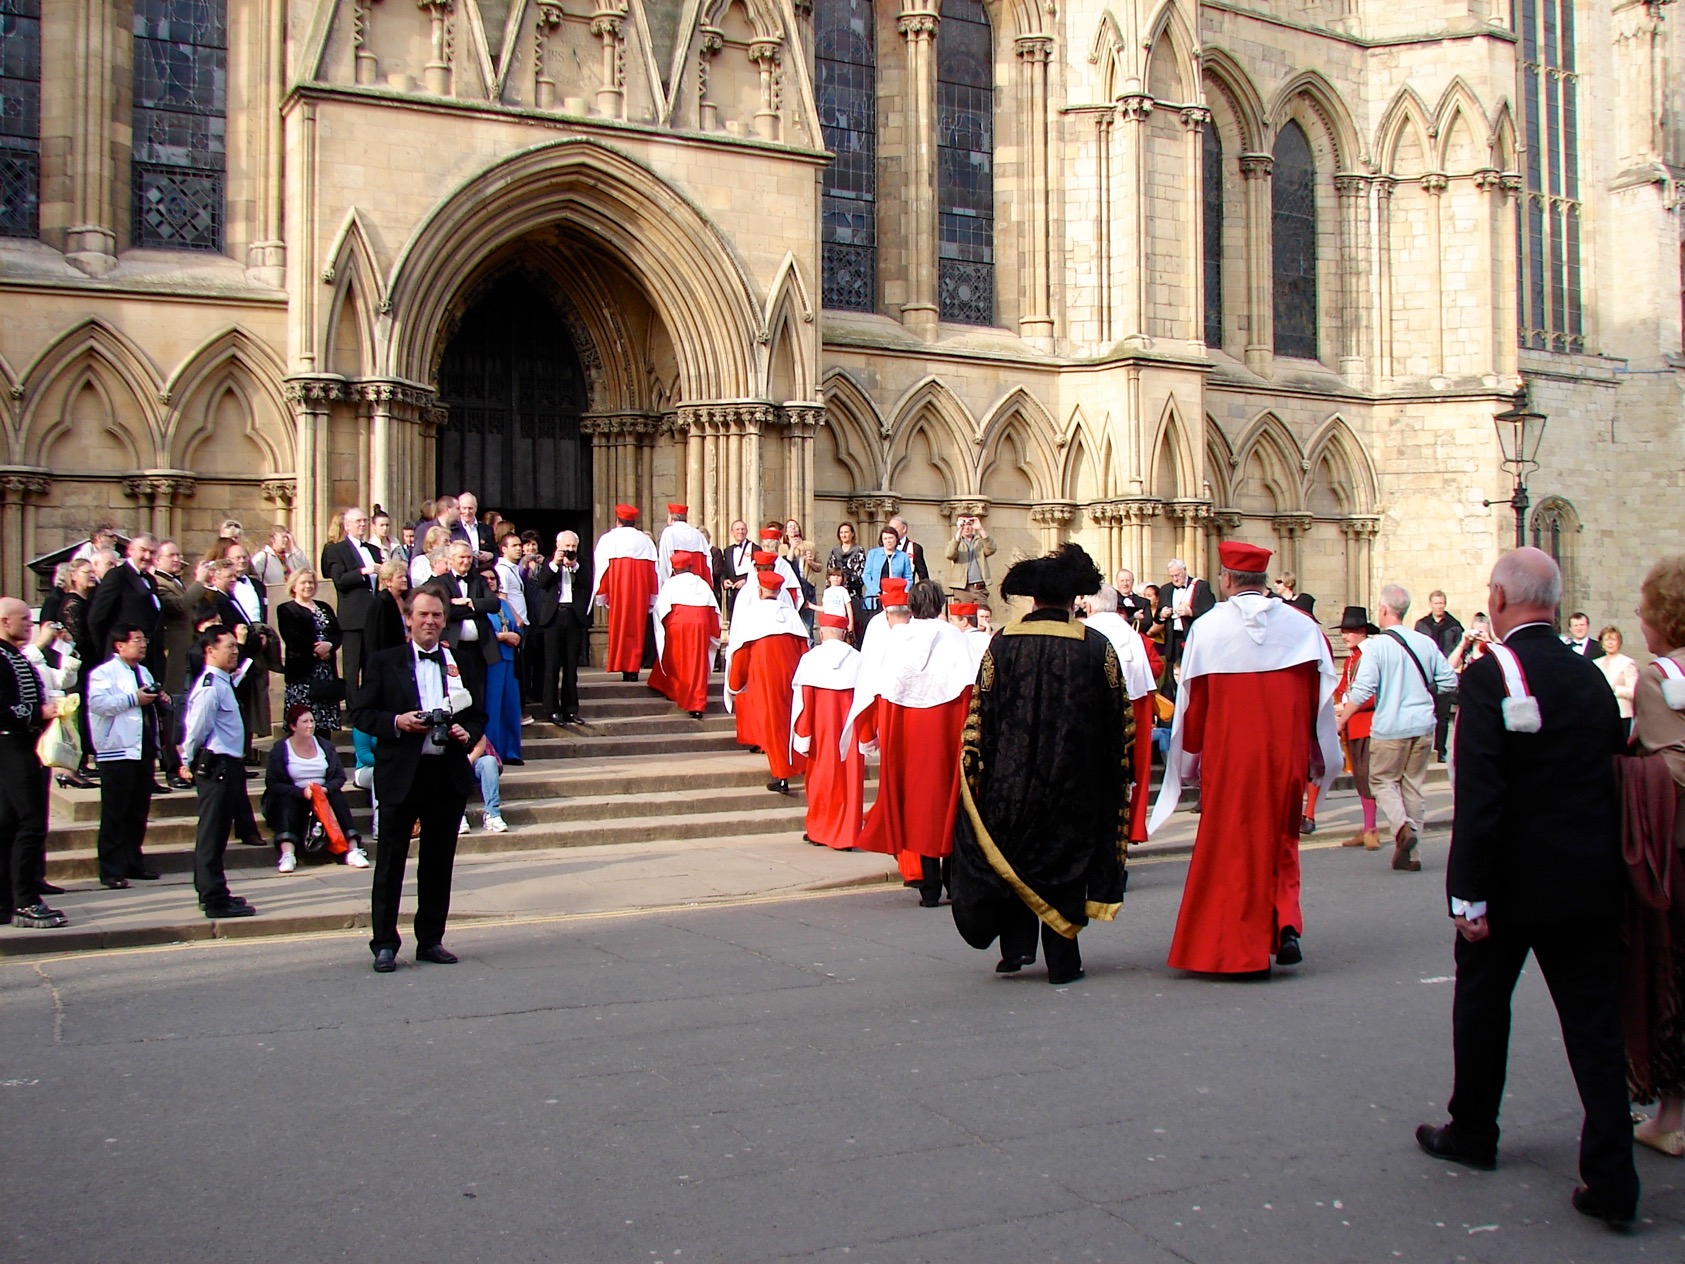  to Evensong at York Minster